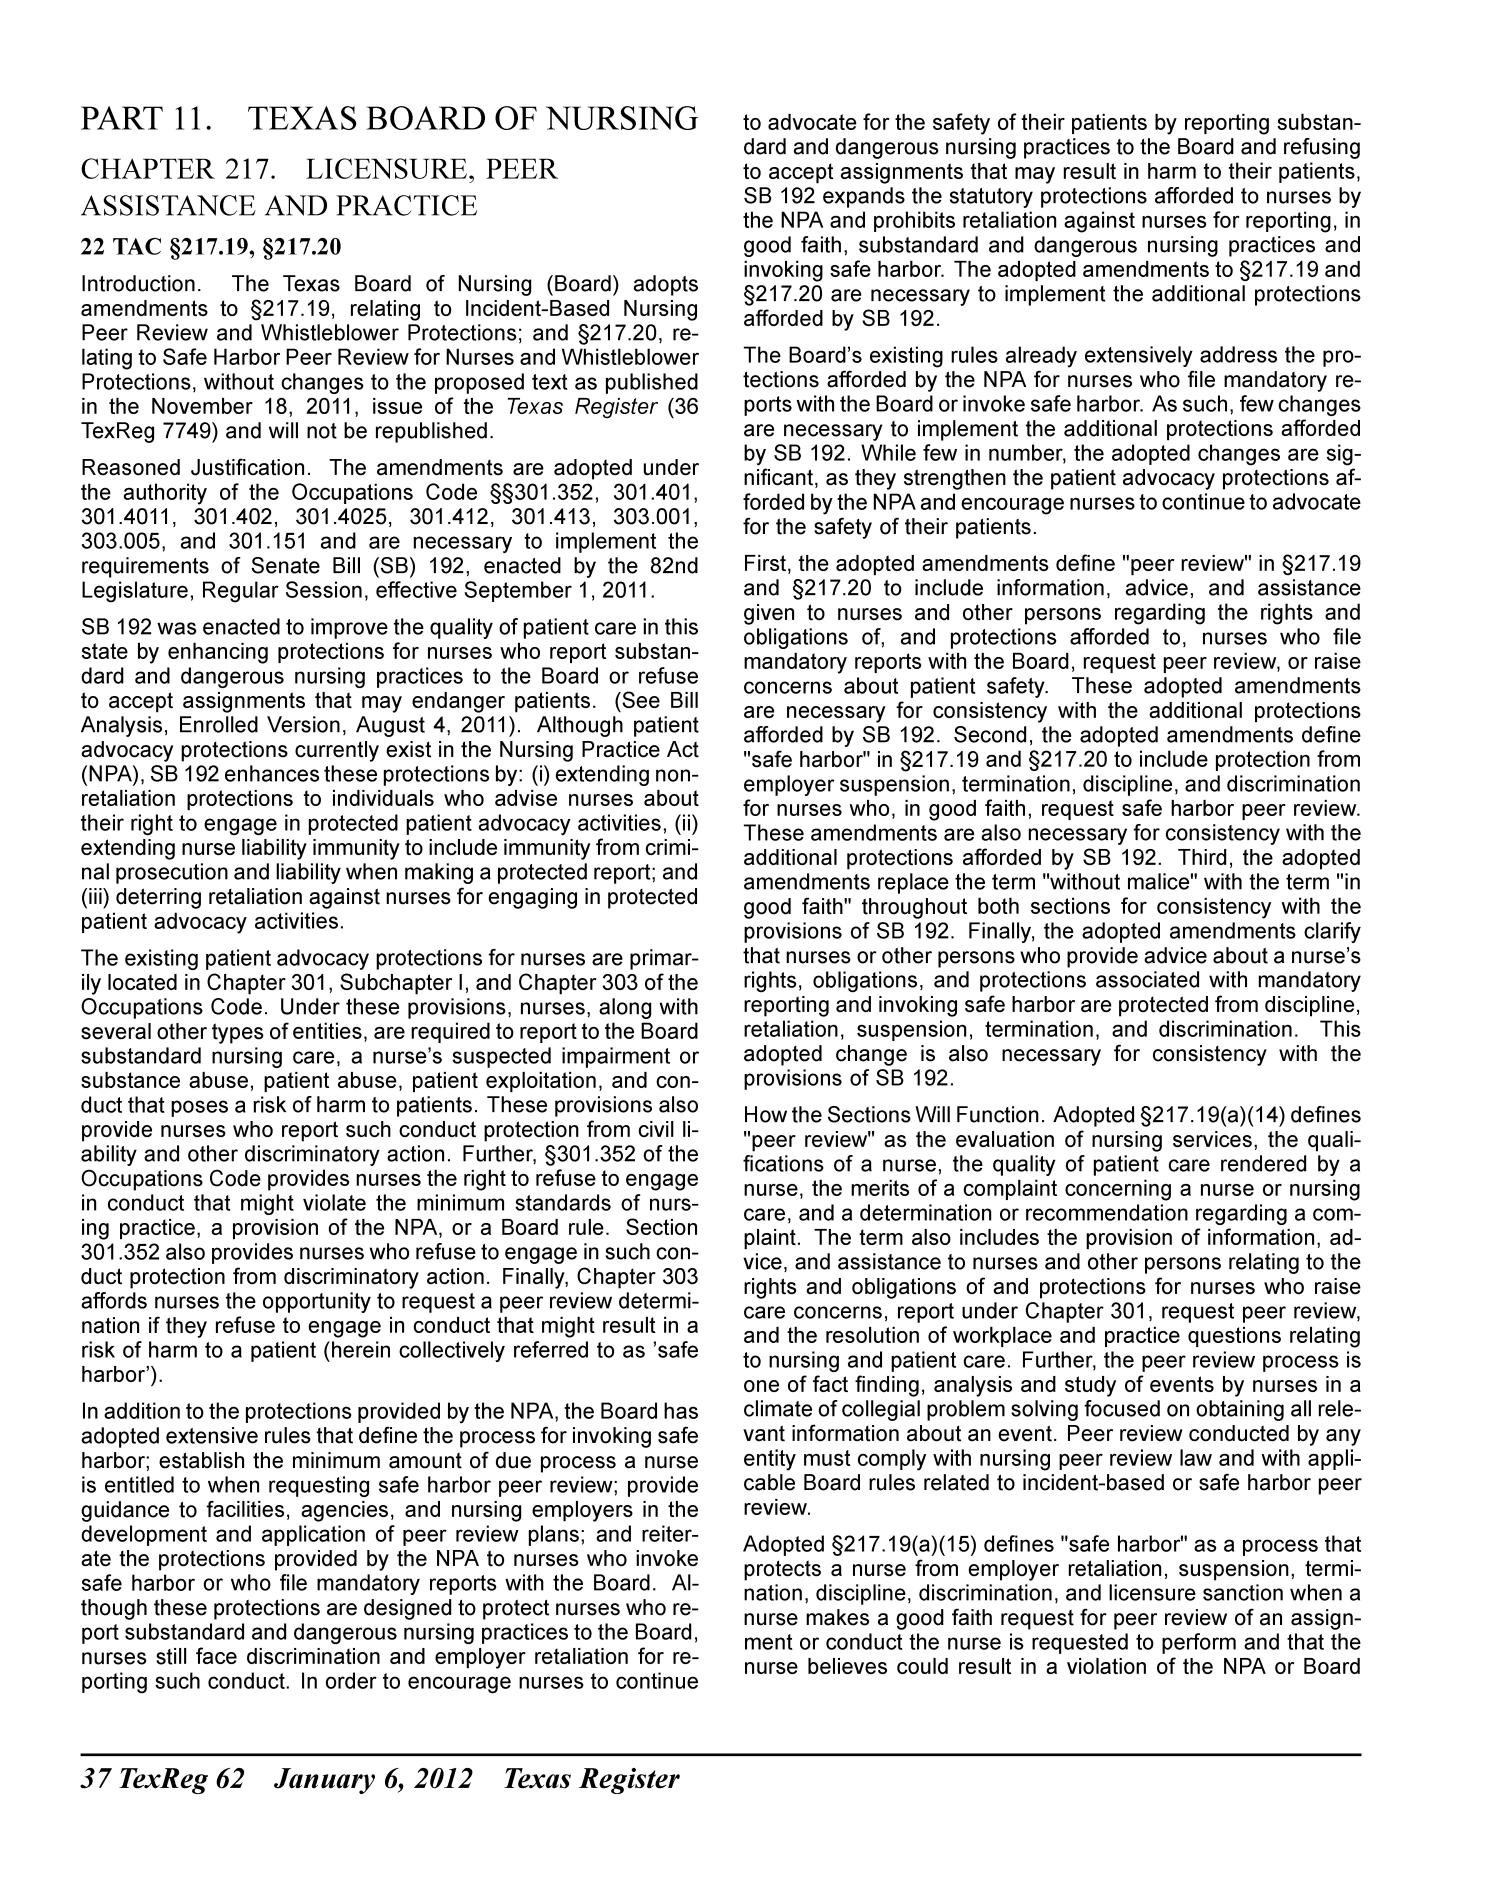 Texas Register, Volume 37, Number 1, Pages 1-84, January 6, 2012
                                                
                                                    62
                                                